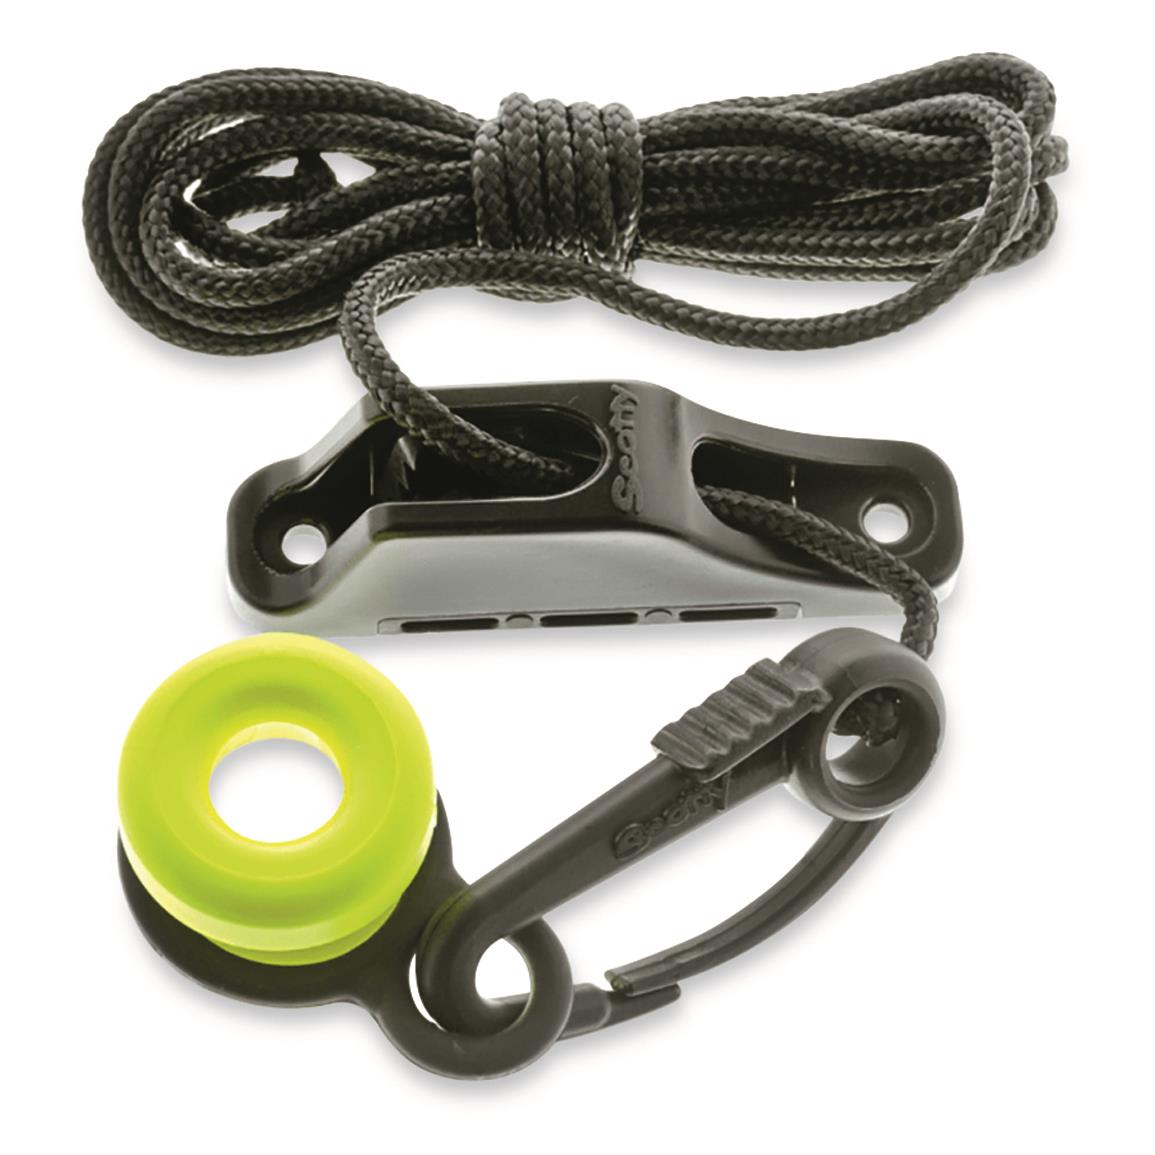 Scotty Downrigger Weight Retriever with Snap, Fairlead Cleat and 78” of  Cord - 733153, Boat Hardware at Sportsman's Guide